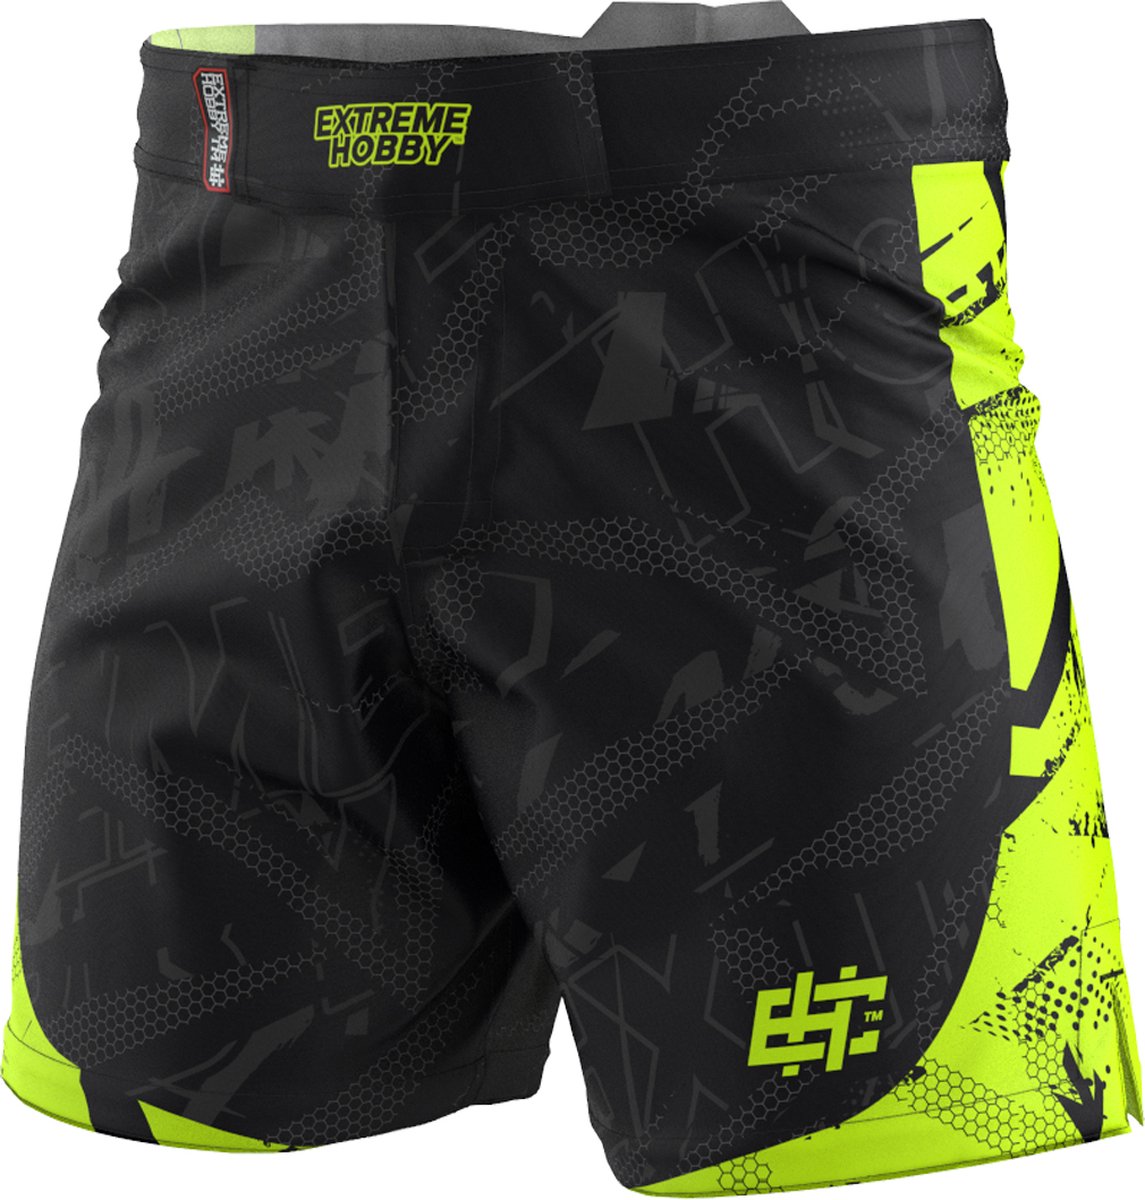 Extreme Hobby - Neo Lime - Training Shorts - Fight Shorts - Zwaart, Lime - Maat M